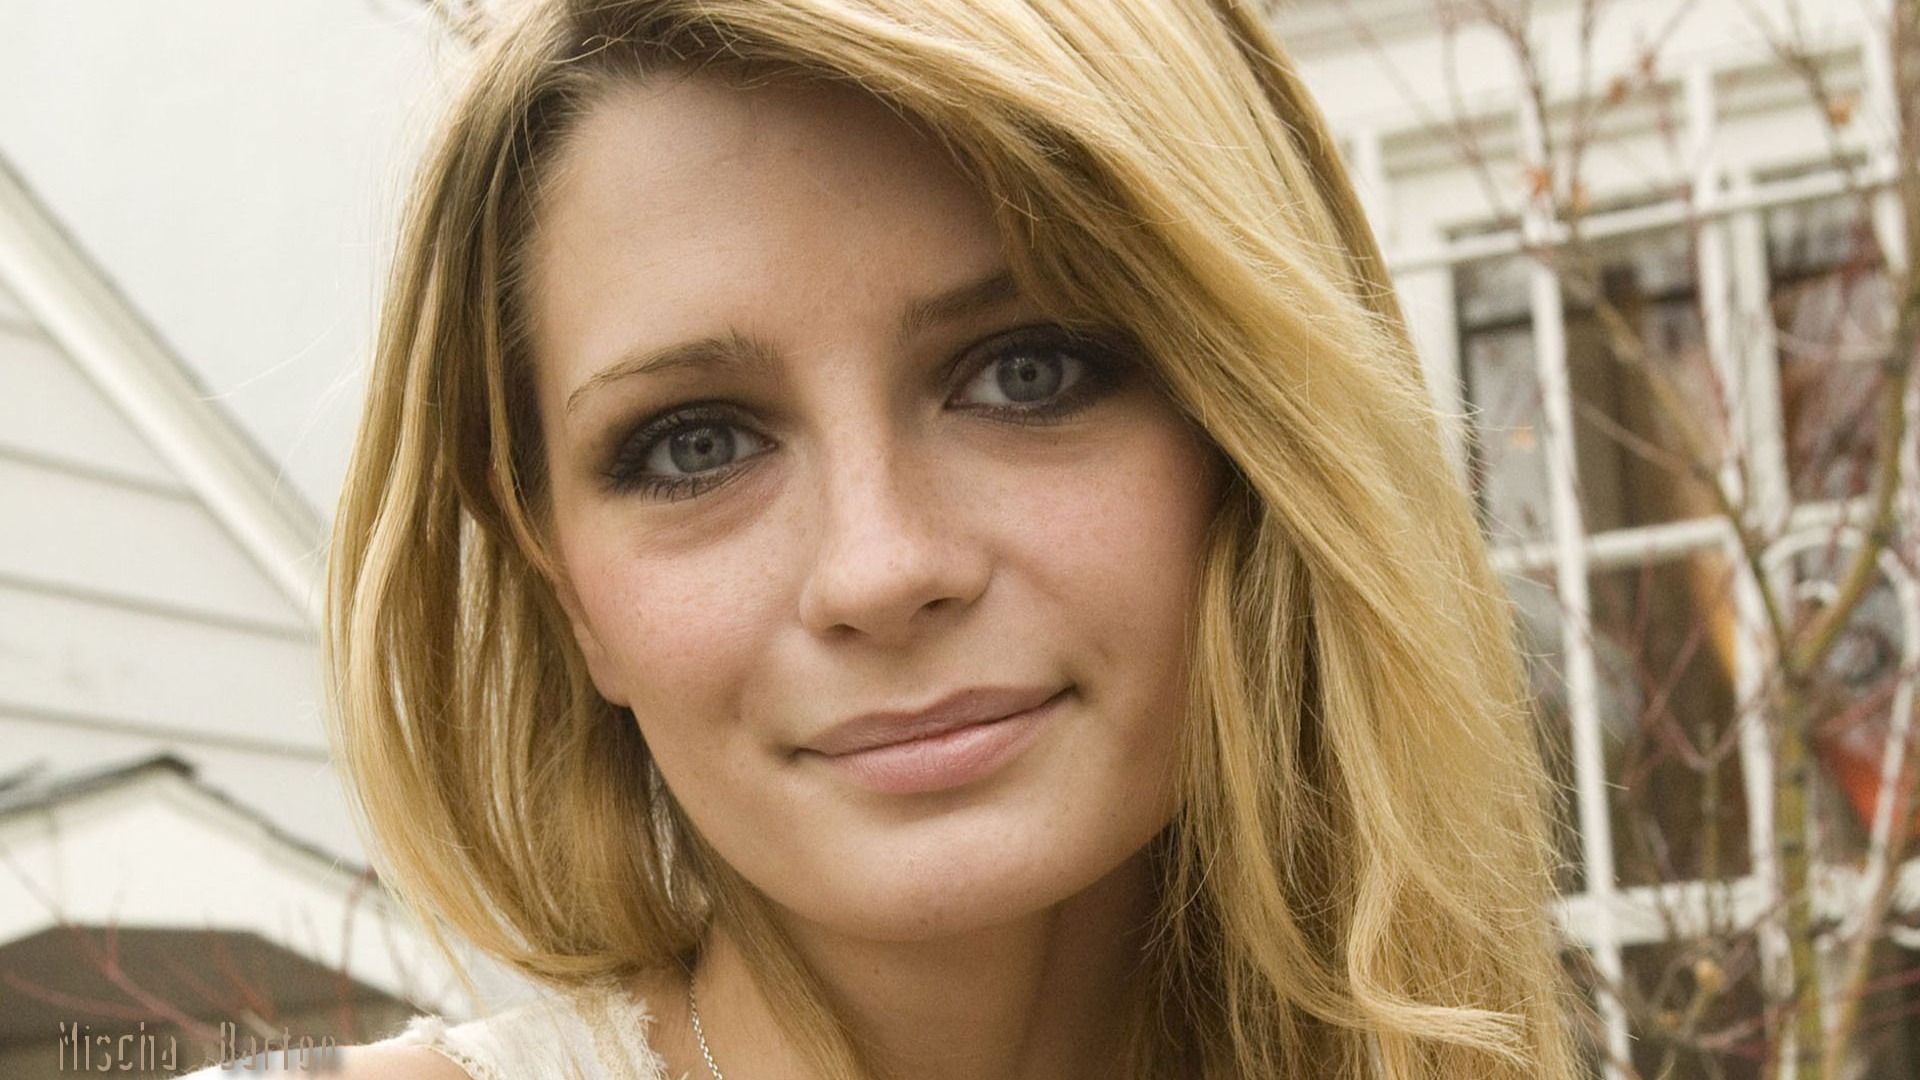 Mischa Barton #078 - 1920x1080 Wallpapers Pictures Photos Images